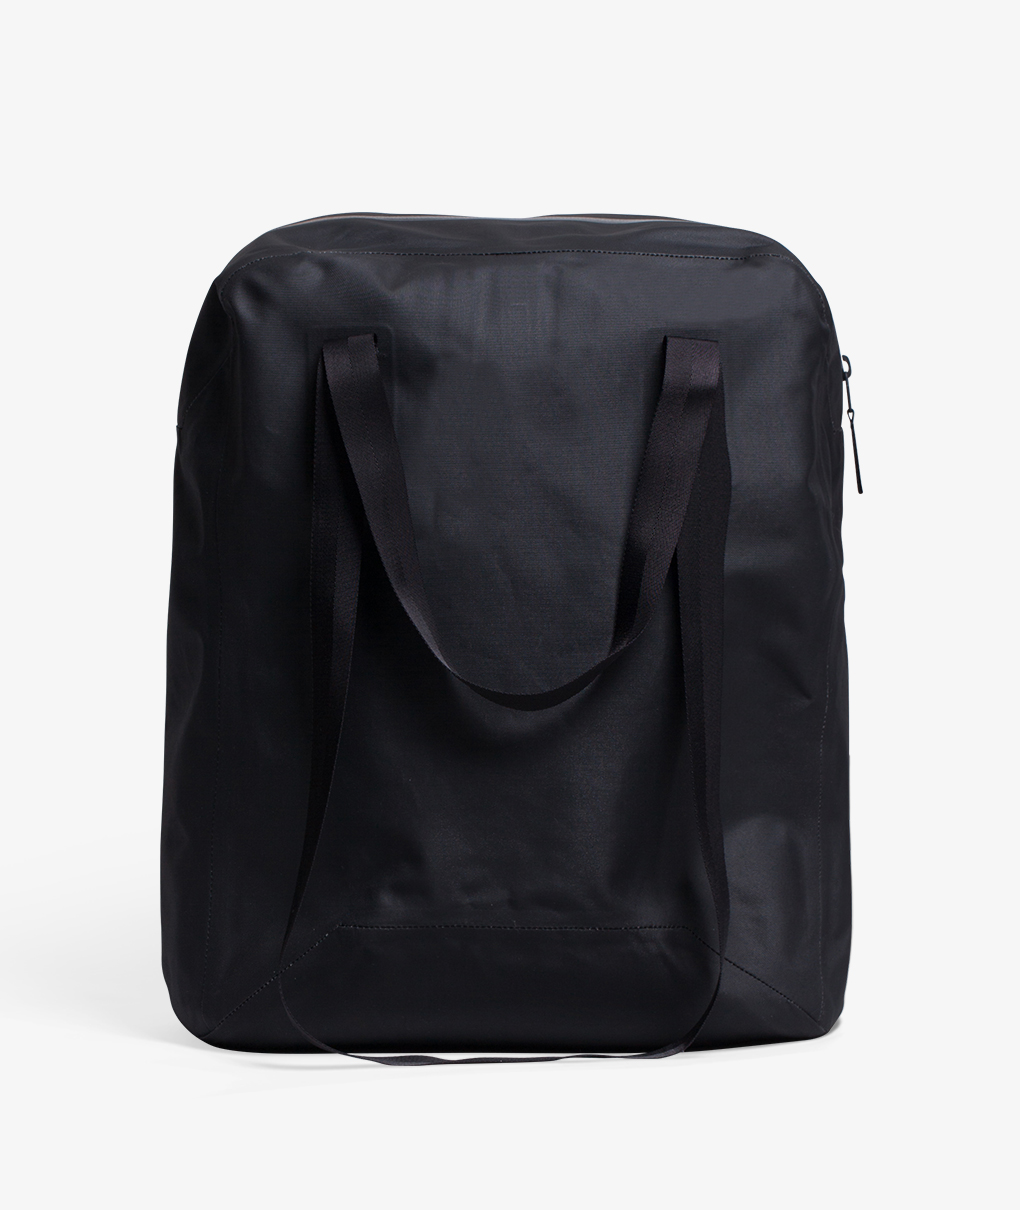 Norse Store | Shipping Worldwide - Seque Tote by Veilance